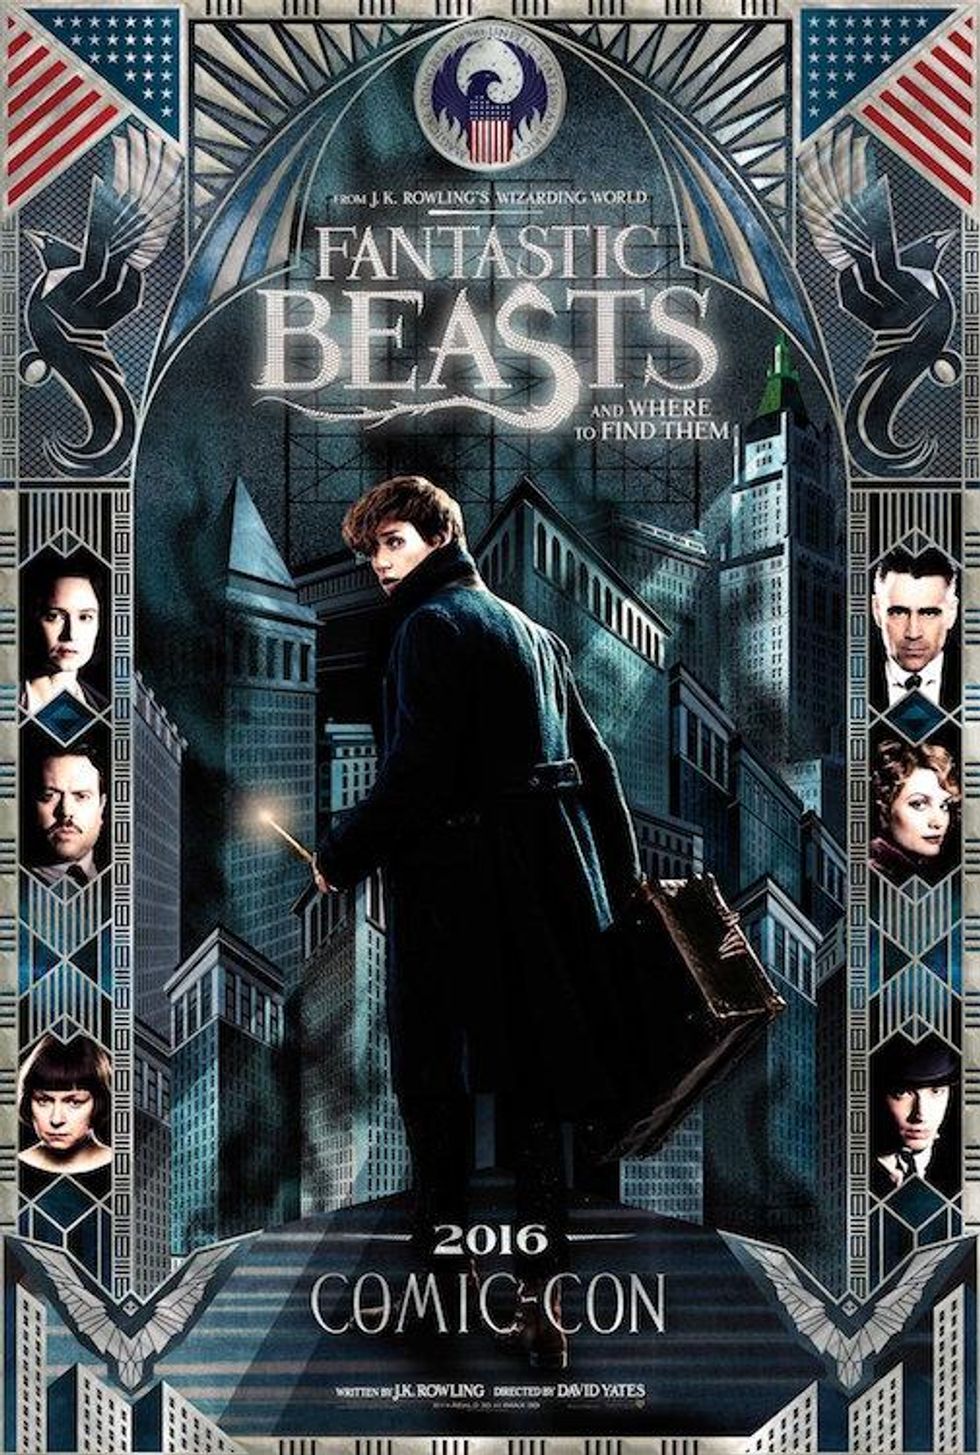 'Fantastic Beasts and Where to Find Them' Trailer